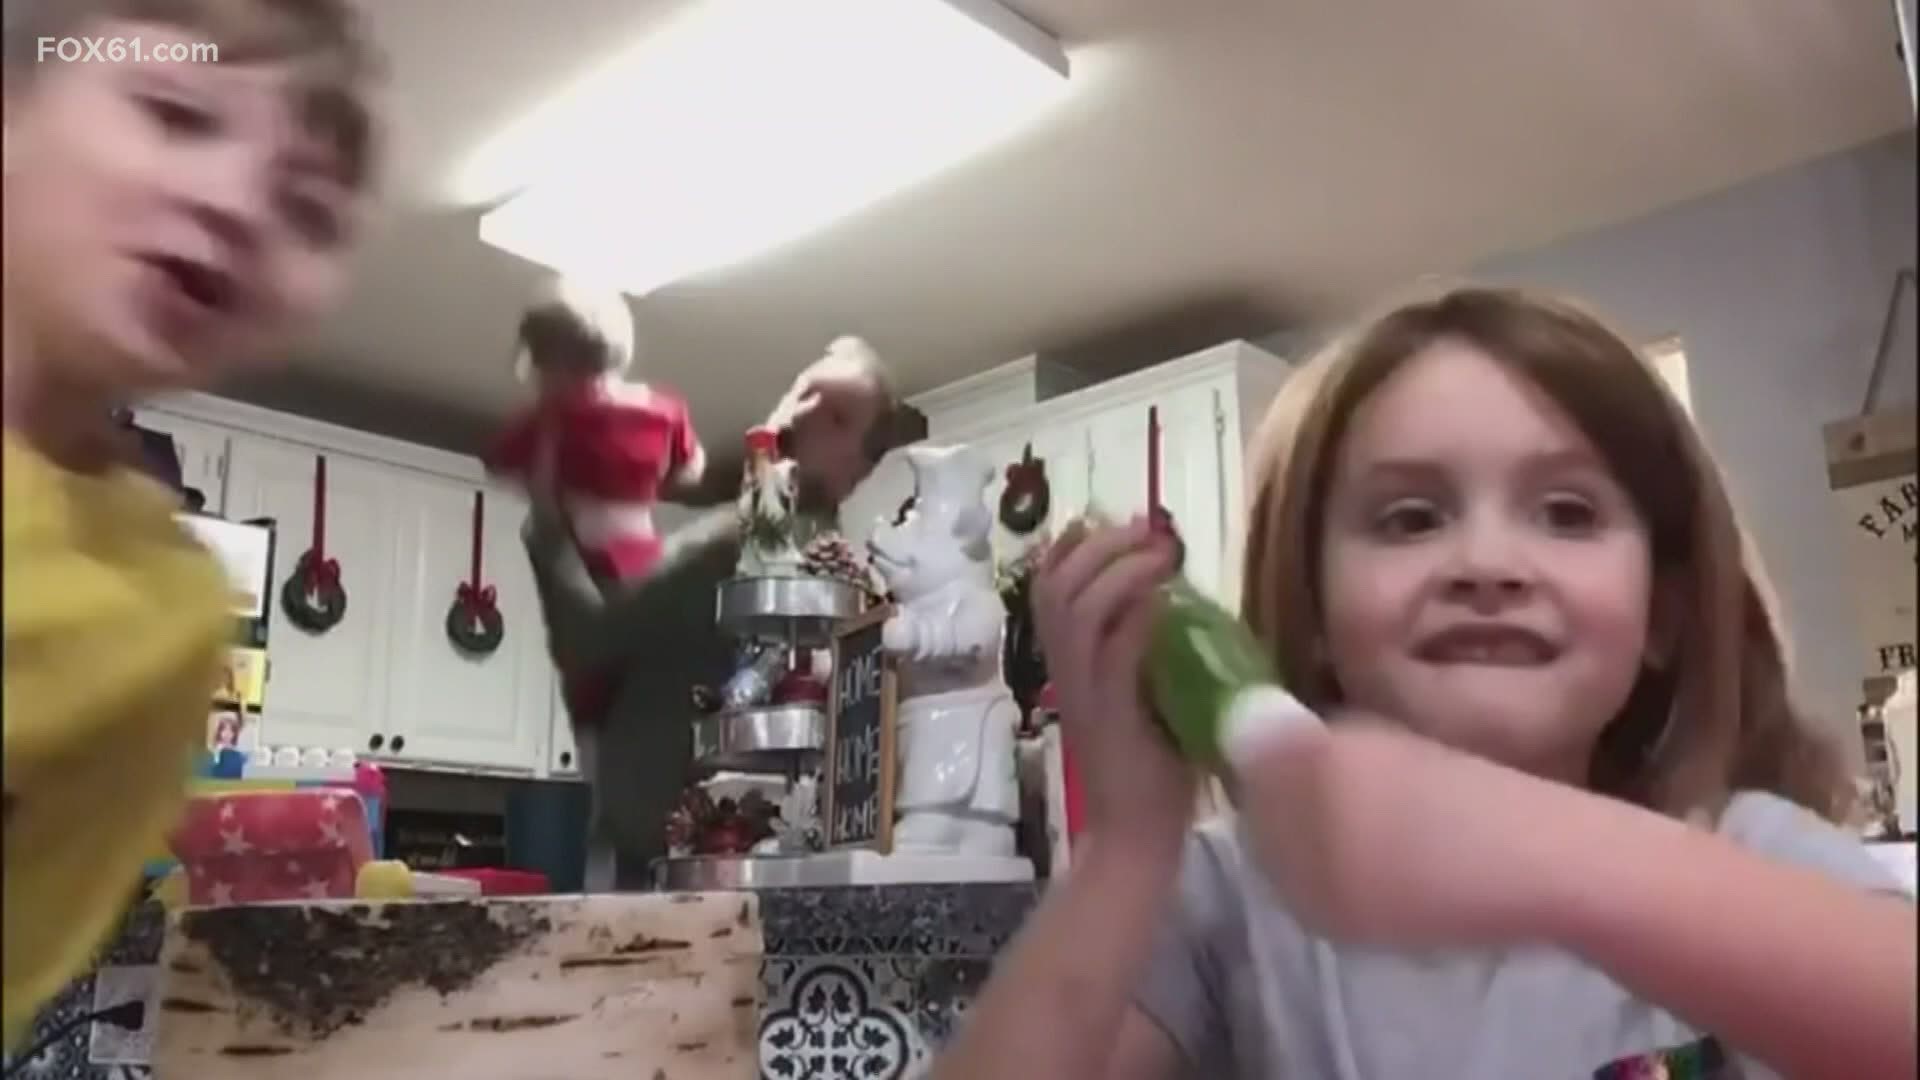 A young girl was filming a craft tutorial, but her dad and brother's crashed it in the best possible way.